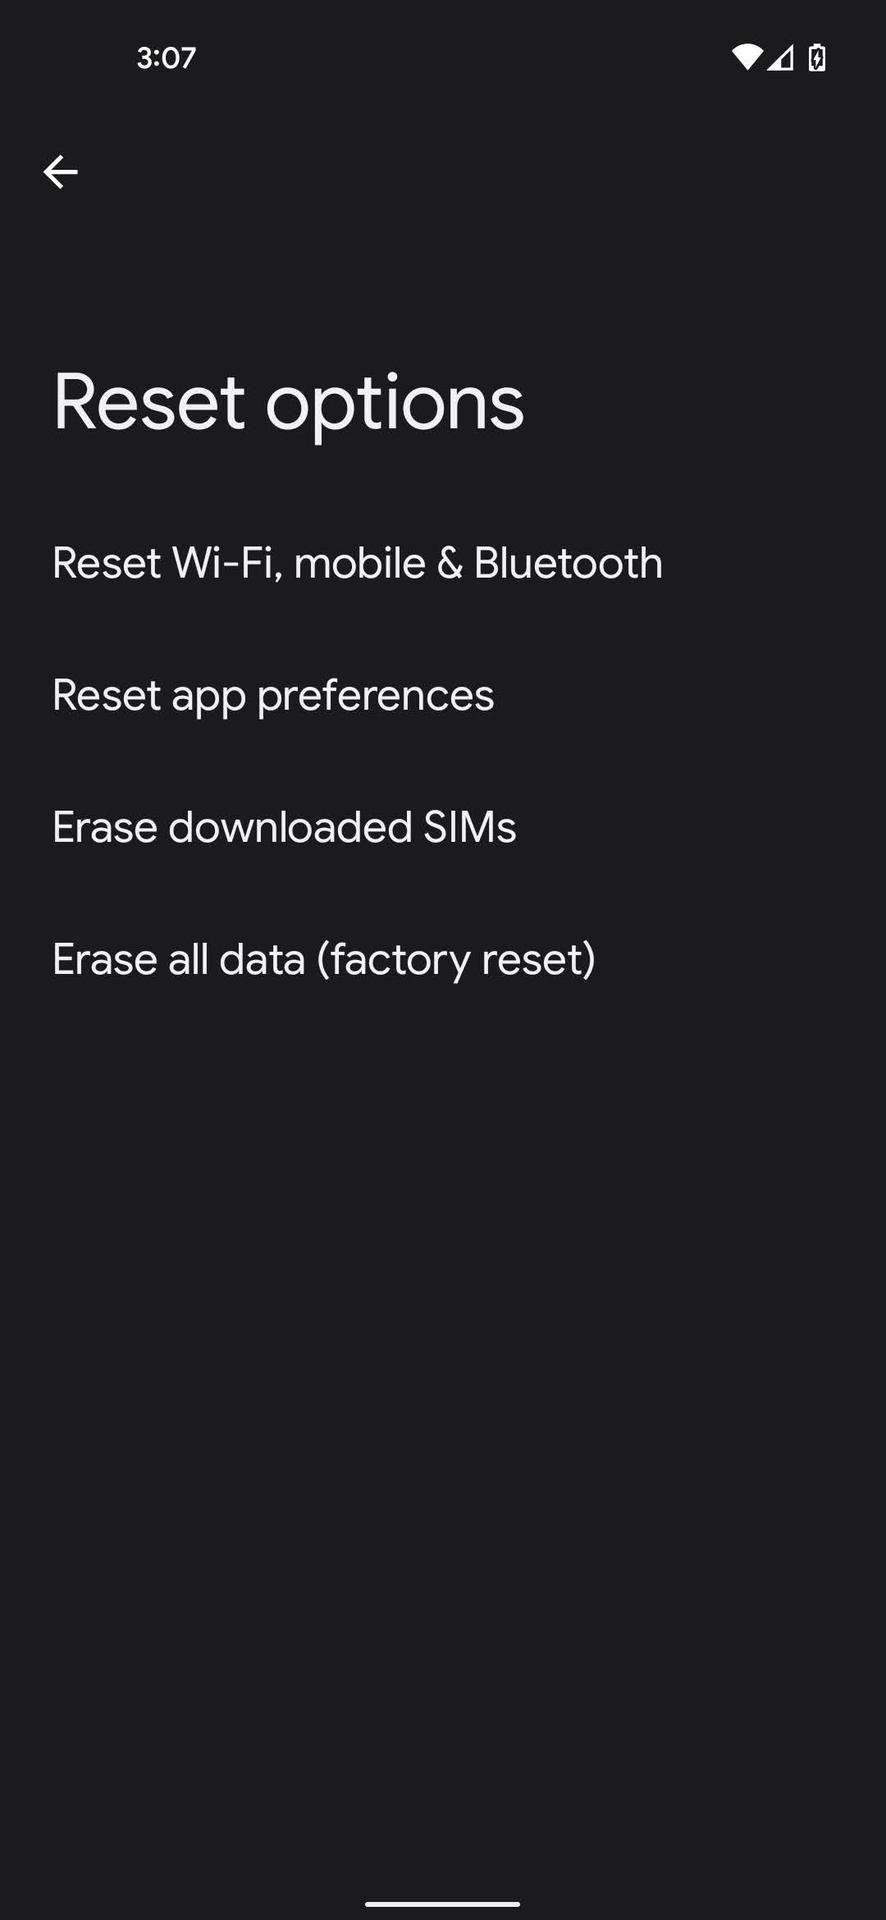 Factory reset Android 3 - How to free up storage space on Android